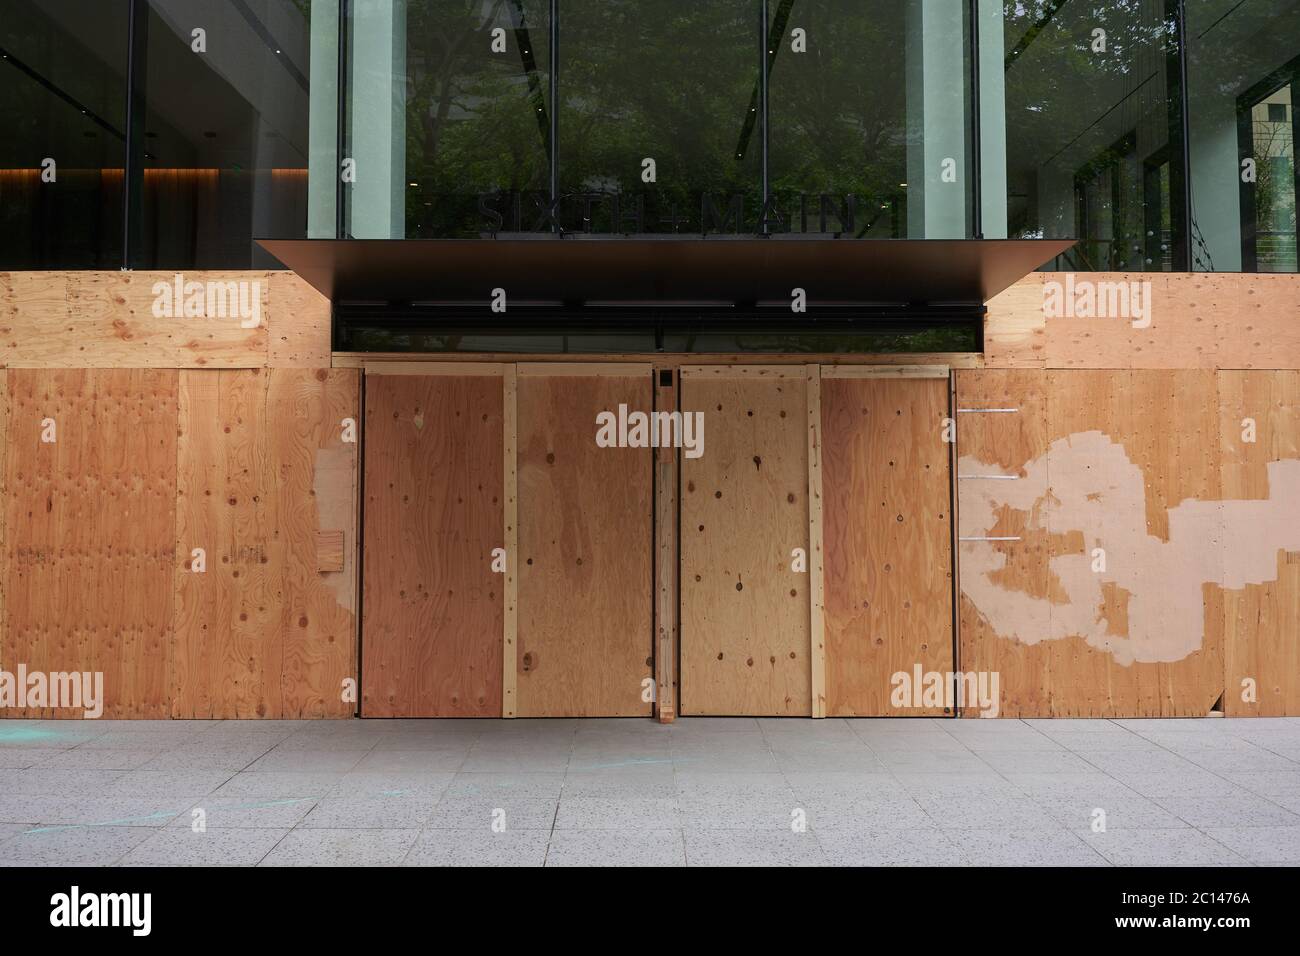 The Sixth+Main office tower in downtown Portland is seen boarded up to protect from further damage amid the ongoing protest on Saturday, Jun 13, 2020. Stock Photo